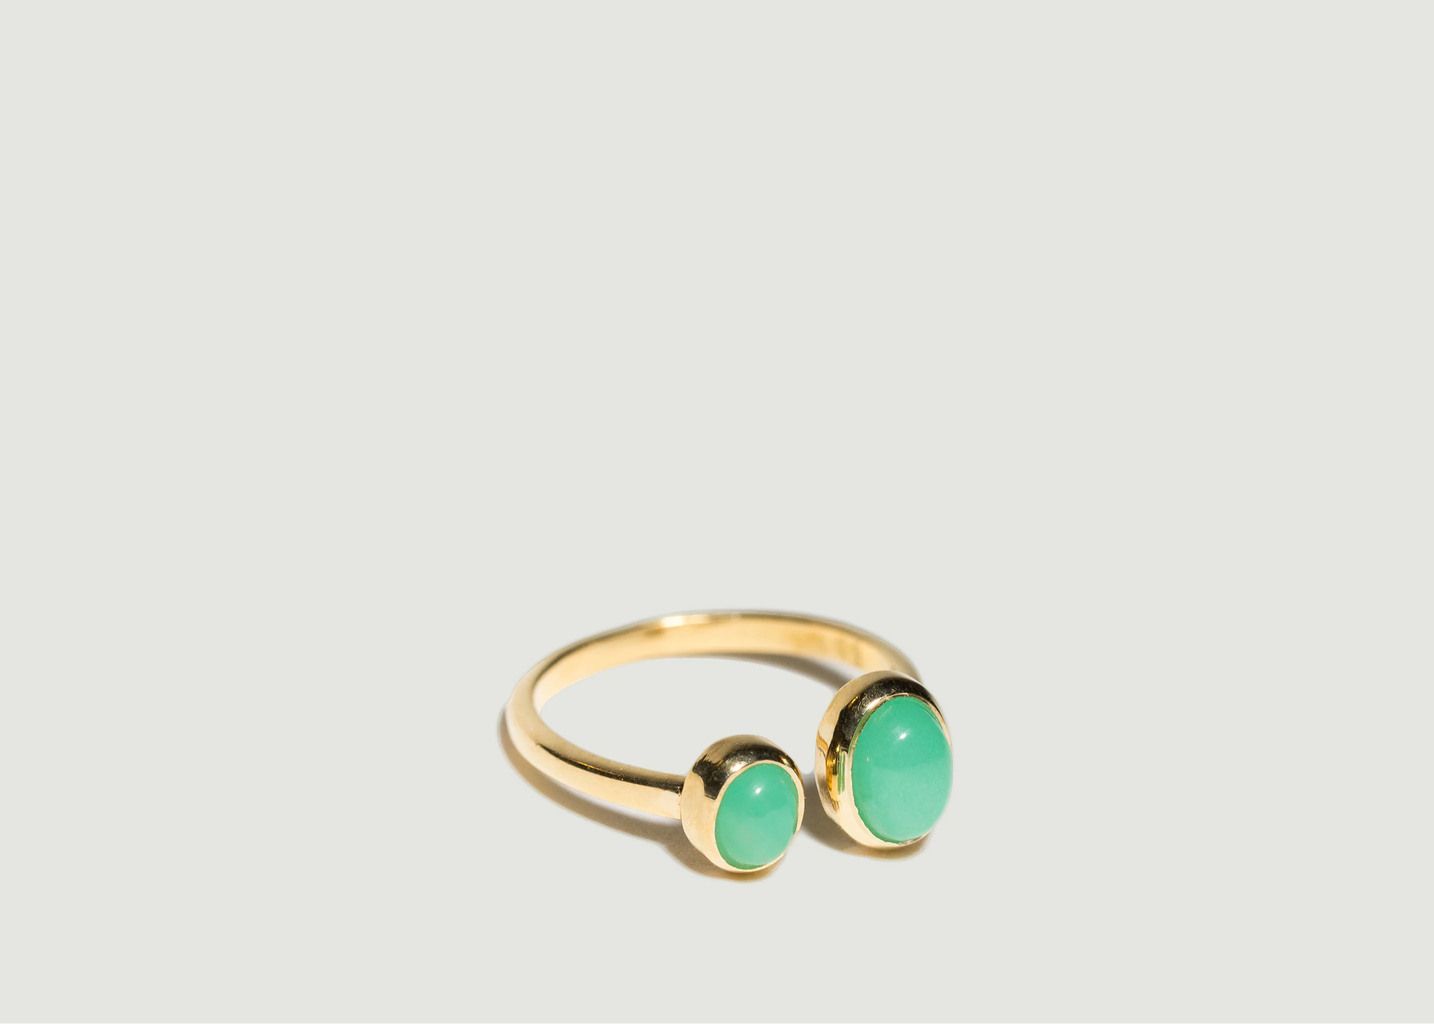 Duo Chlorophylle ring - Gamme Blanche